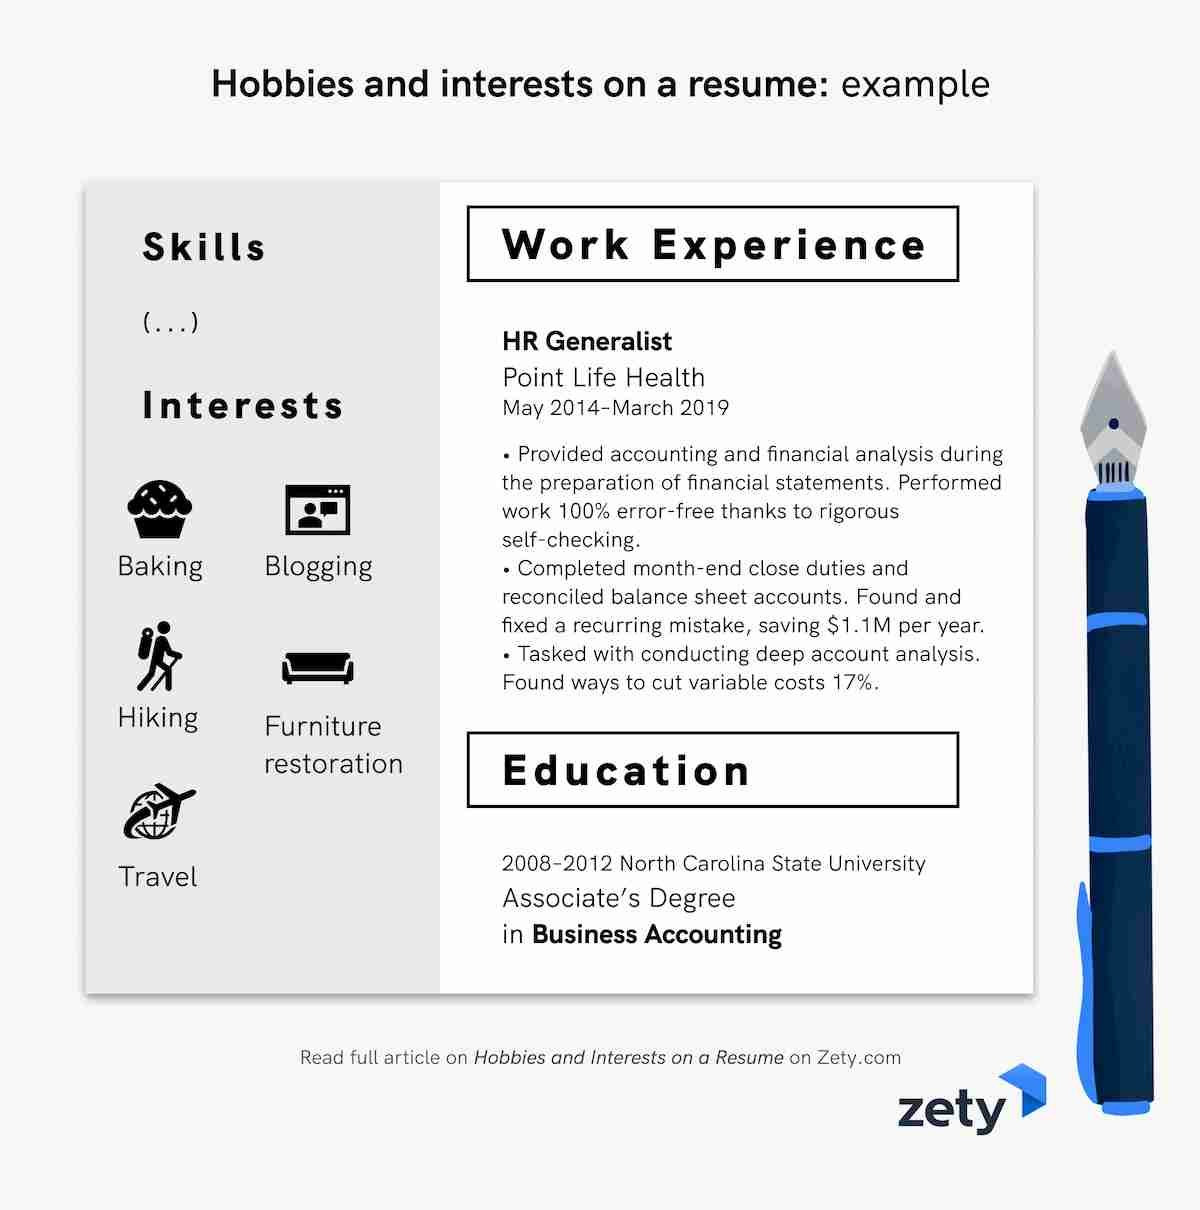 Area Of Interest In Resume Sample List Of Hobbies and Interests for Resume & Cv [20 Examples]